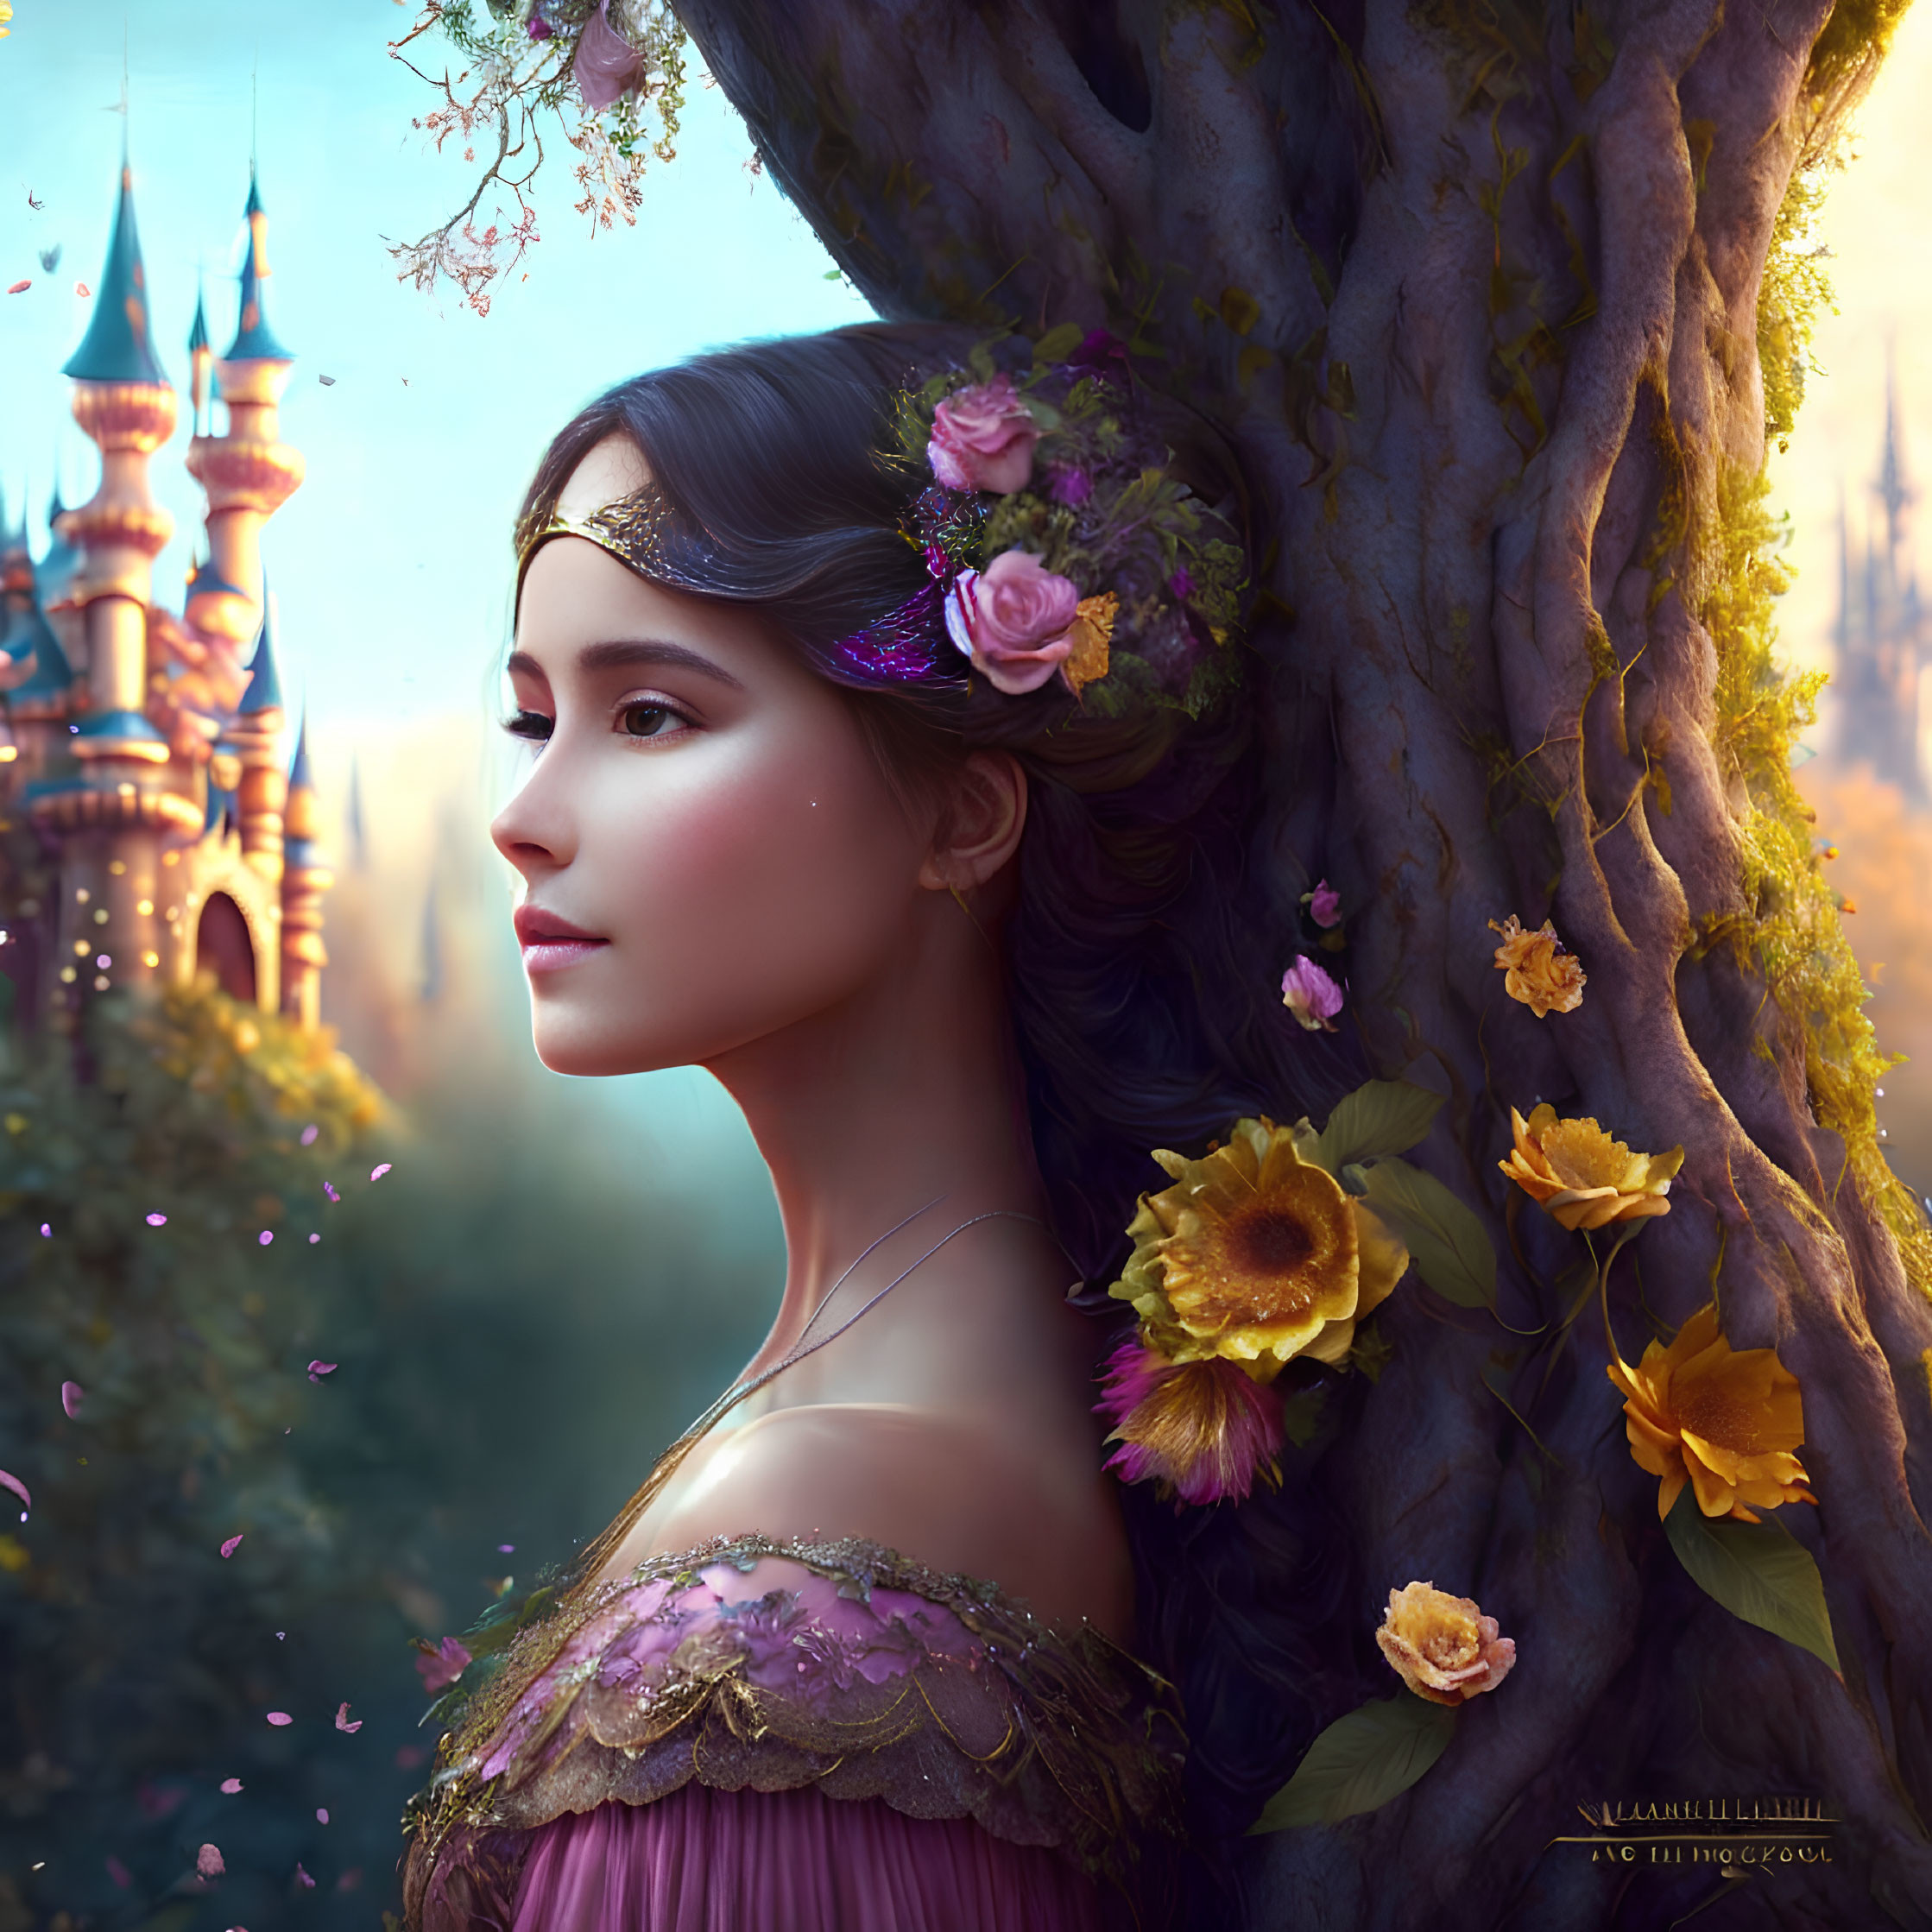 Profile Portrait of Woman with Floral Adornments Merging with Tree and Castle Backdrop